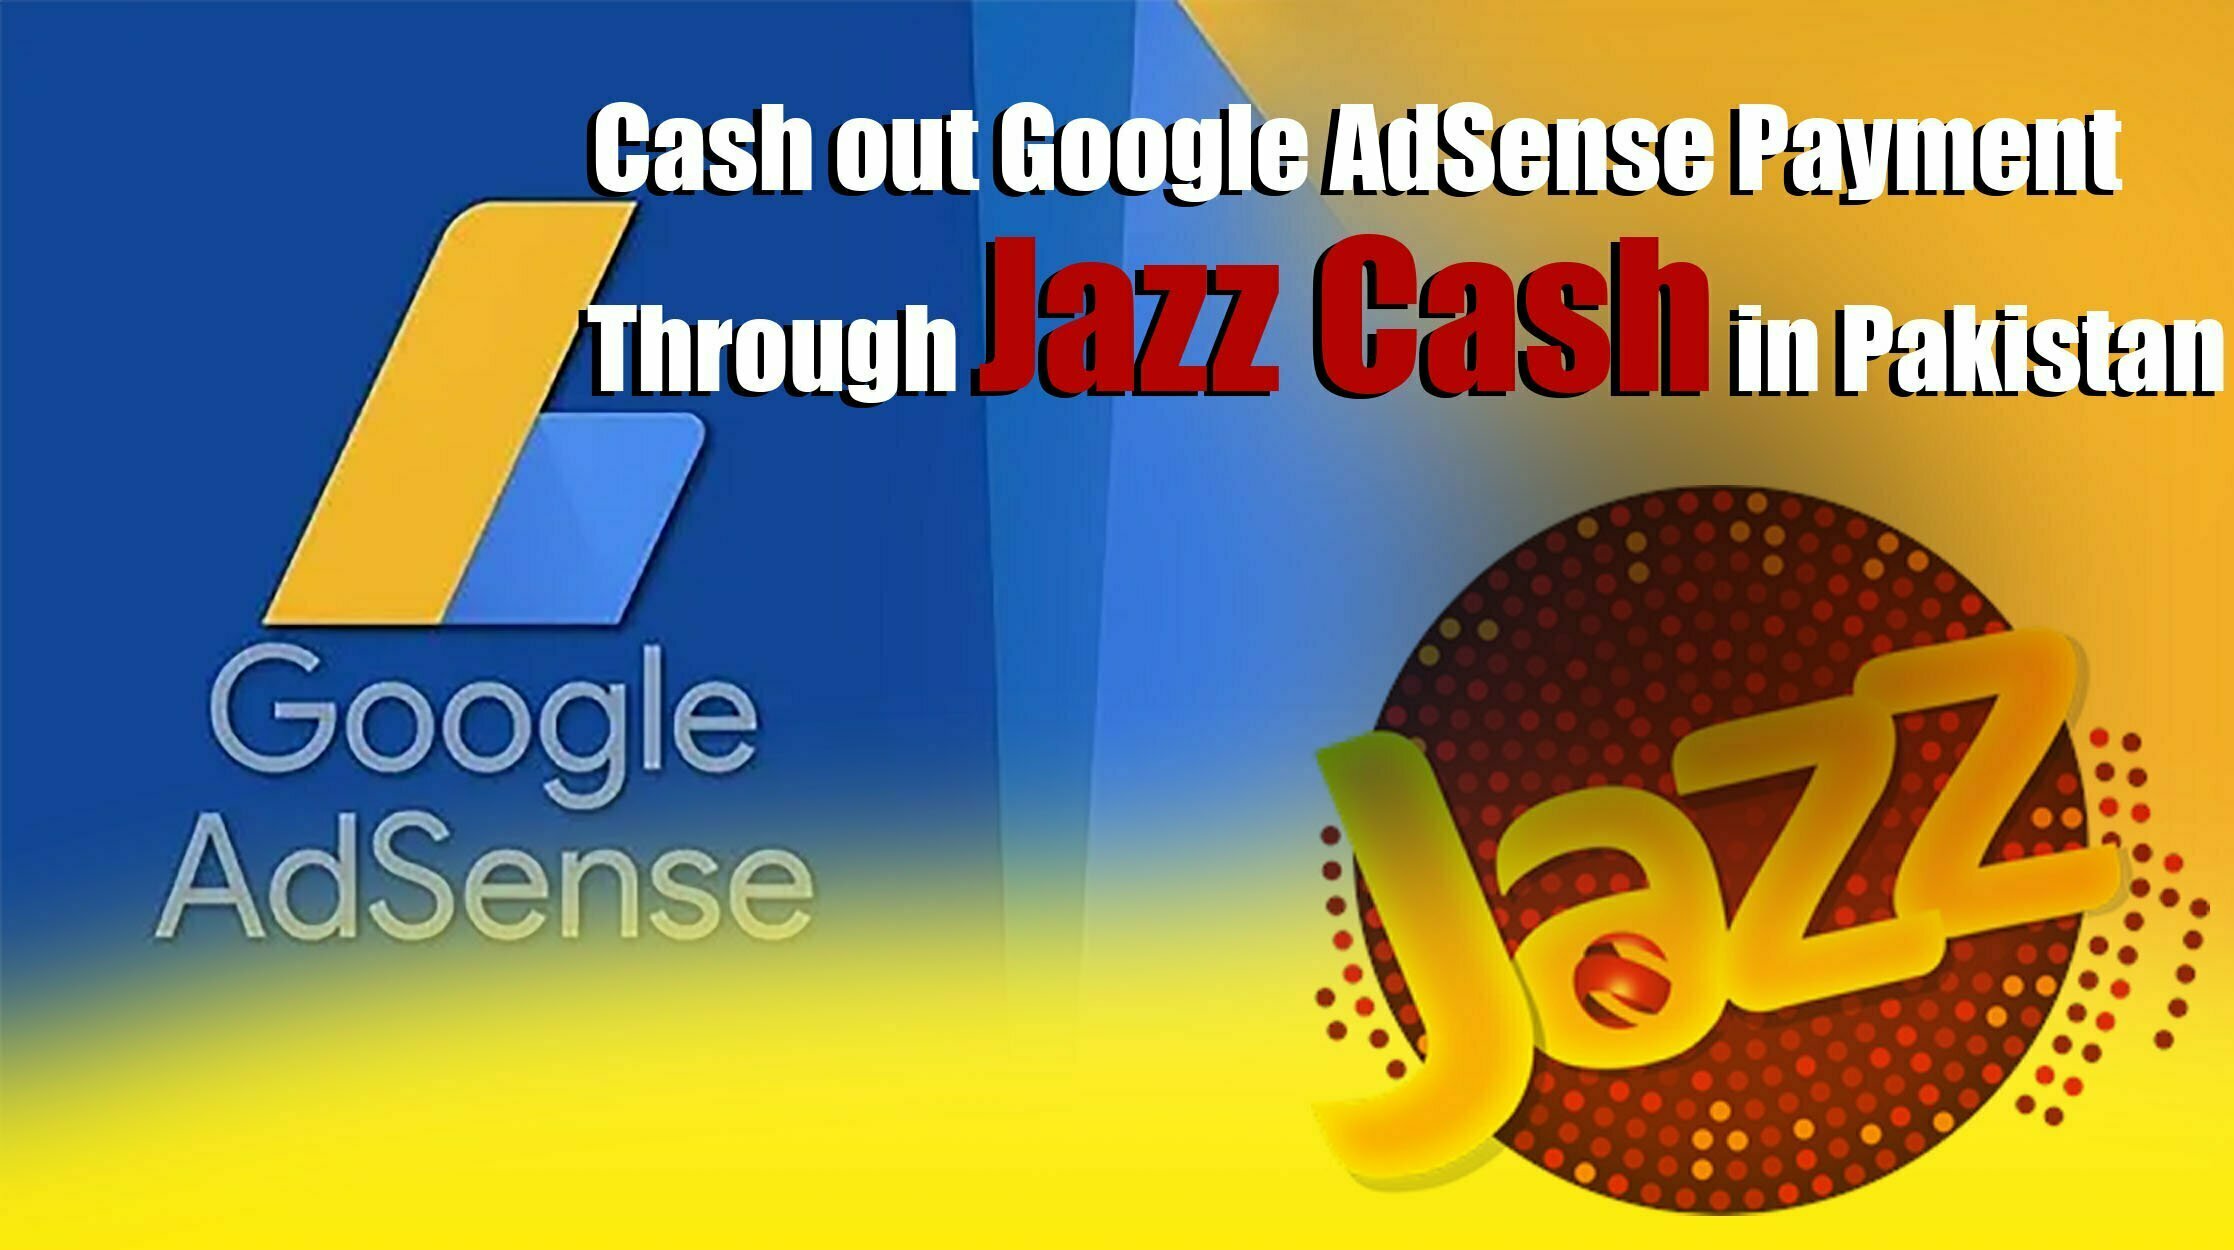 How to Cash out Google AdSense Payment Through Jazz Cash in Pakistan?